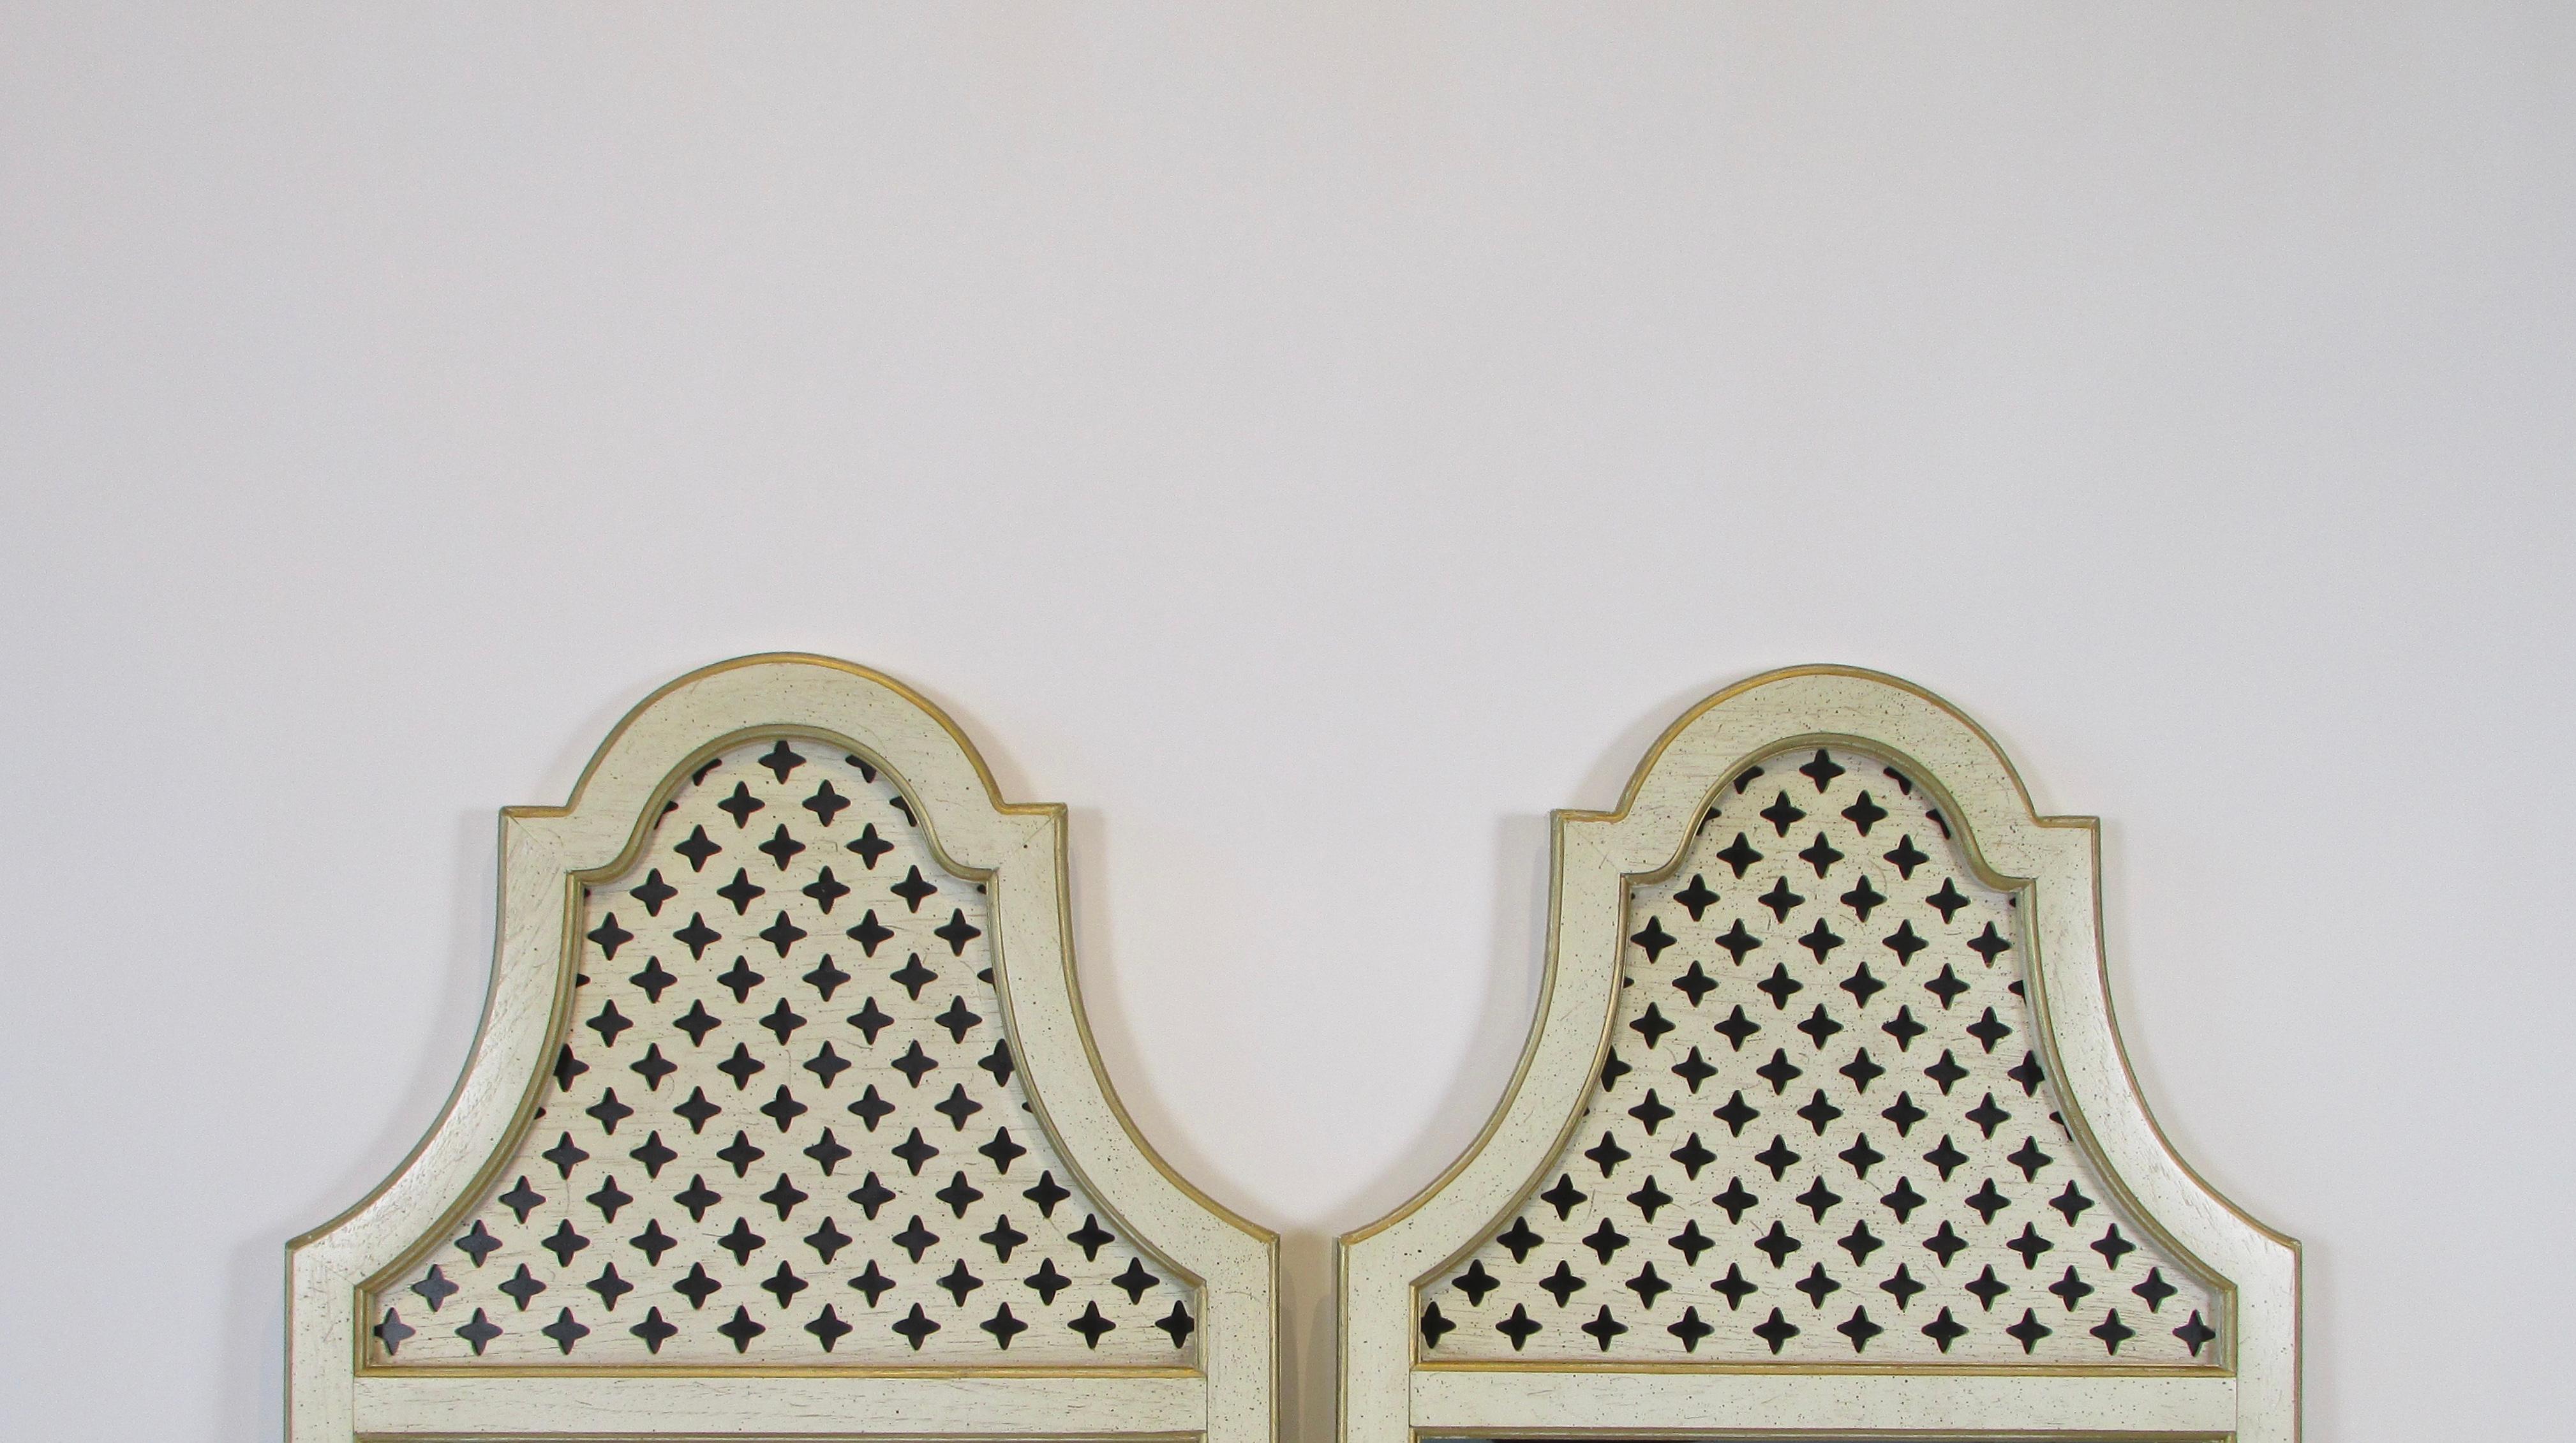 1950s Hollywood Regency Fretwork Style Mirror Pair For Sale 2